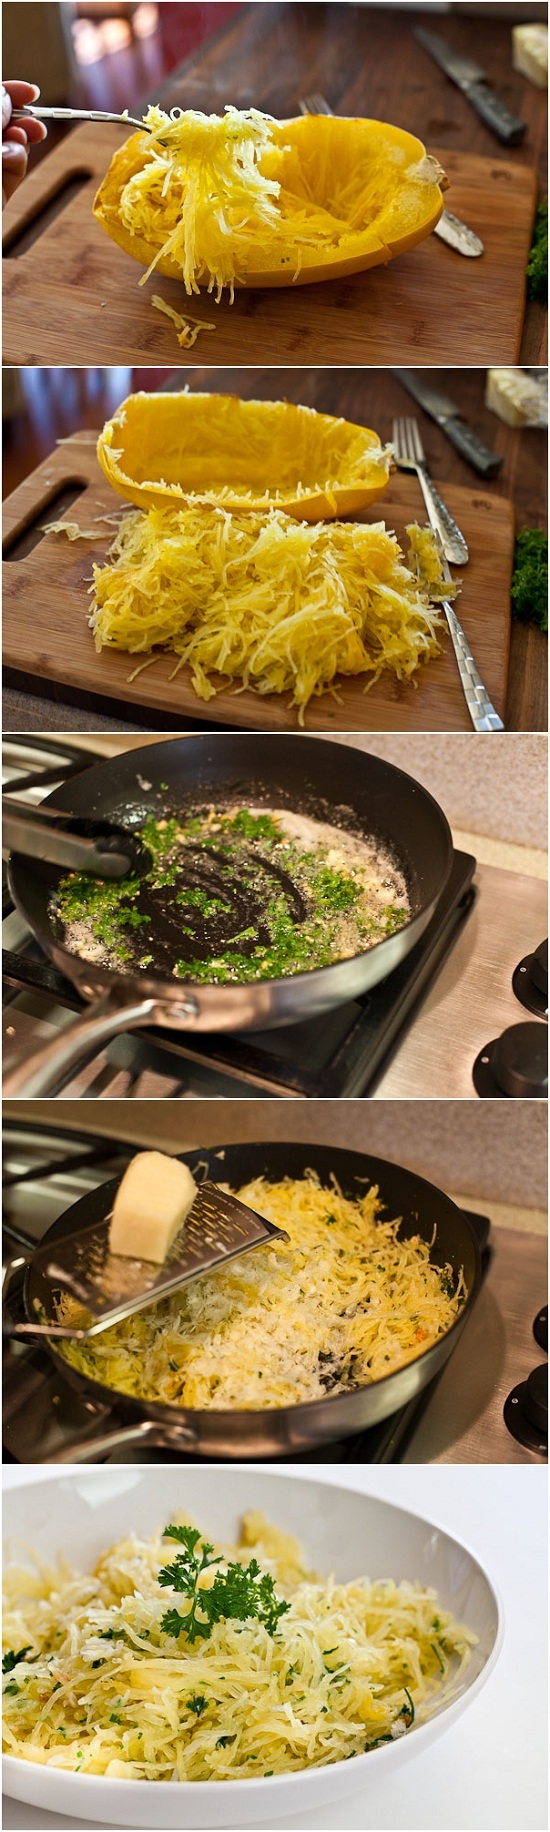 Baked-Spaghetti-Squash-with-Garlic-and-Butter-Recipe